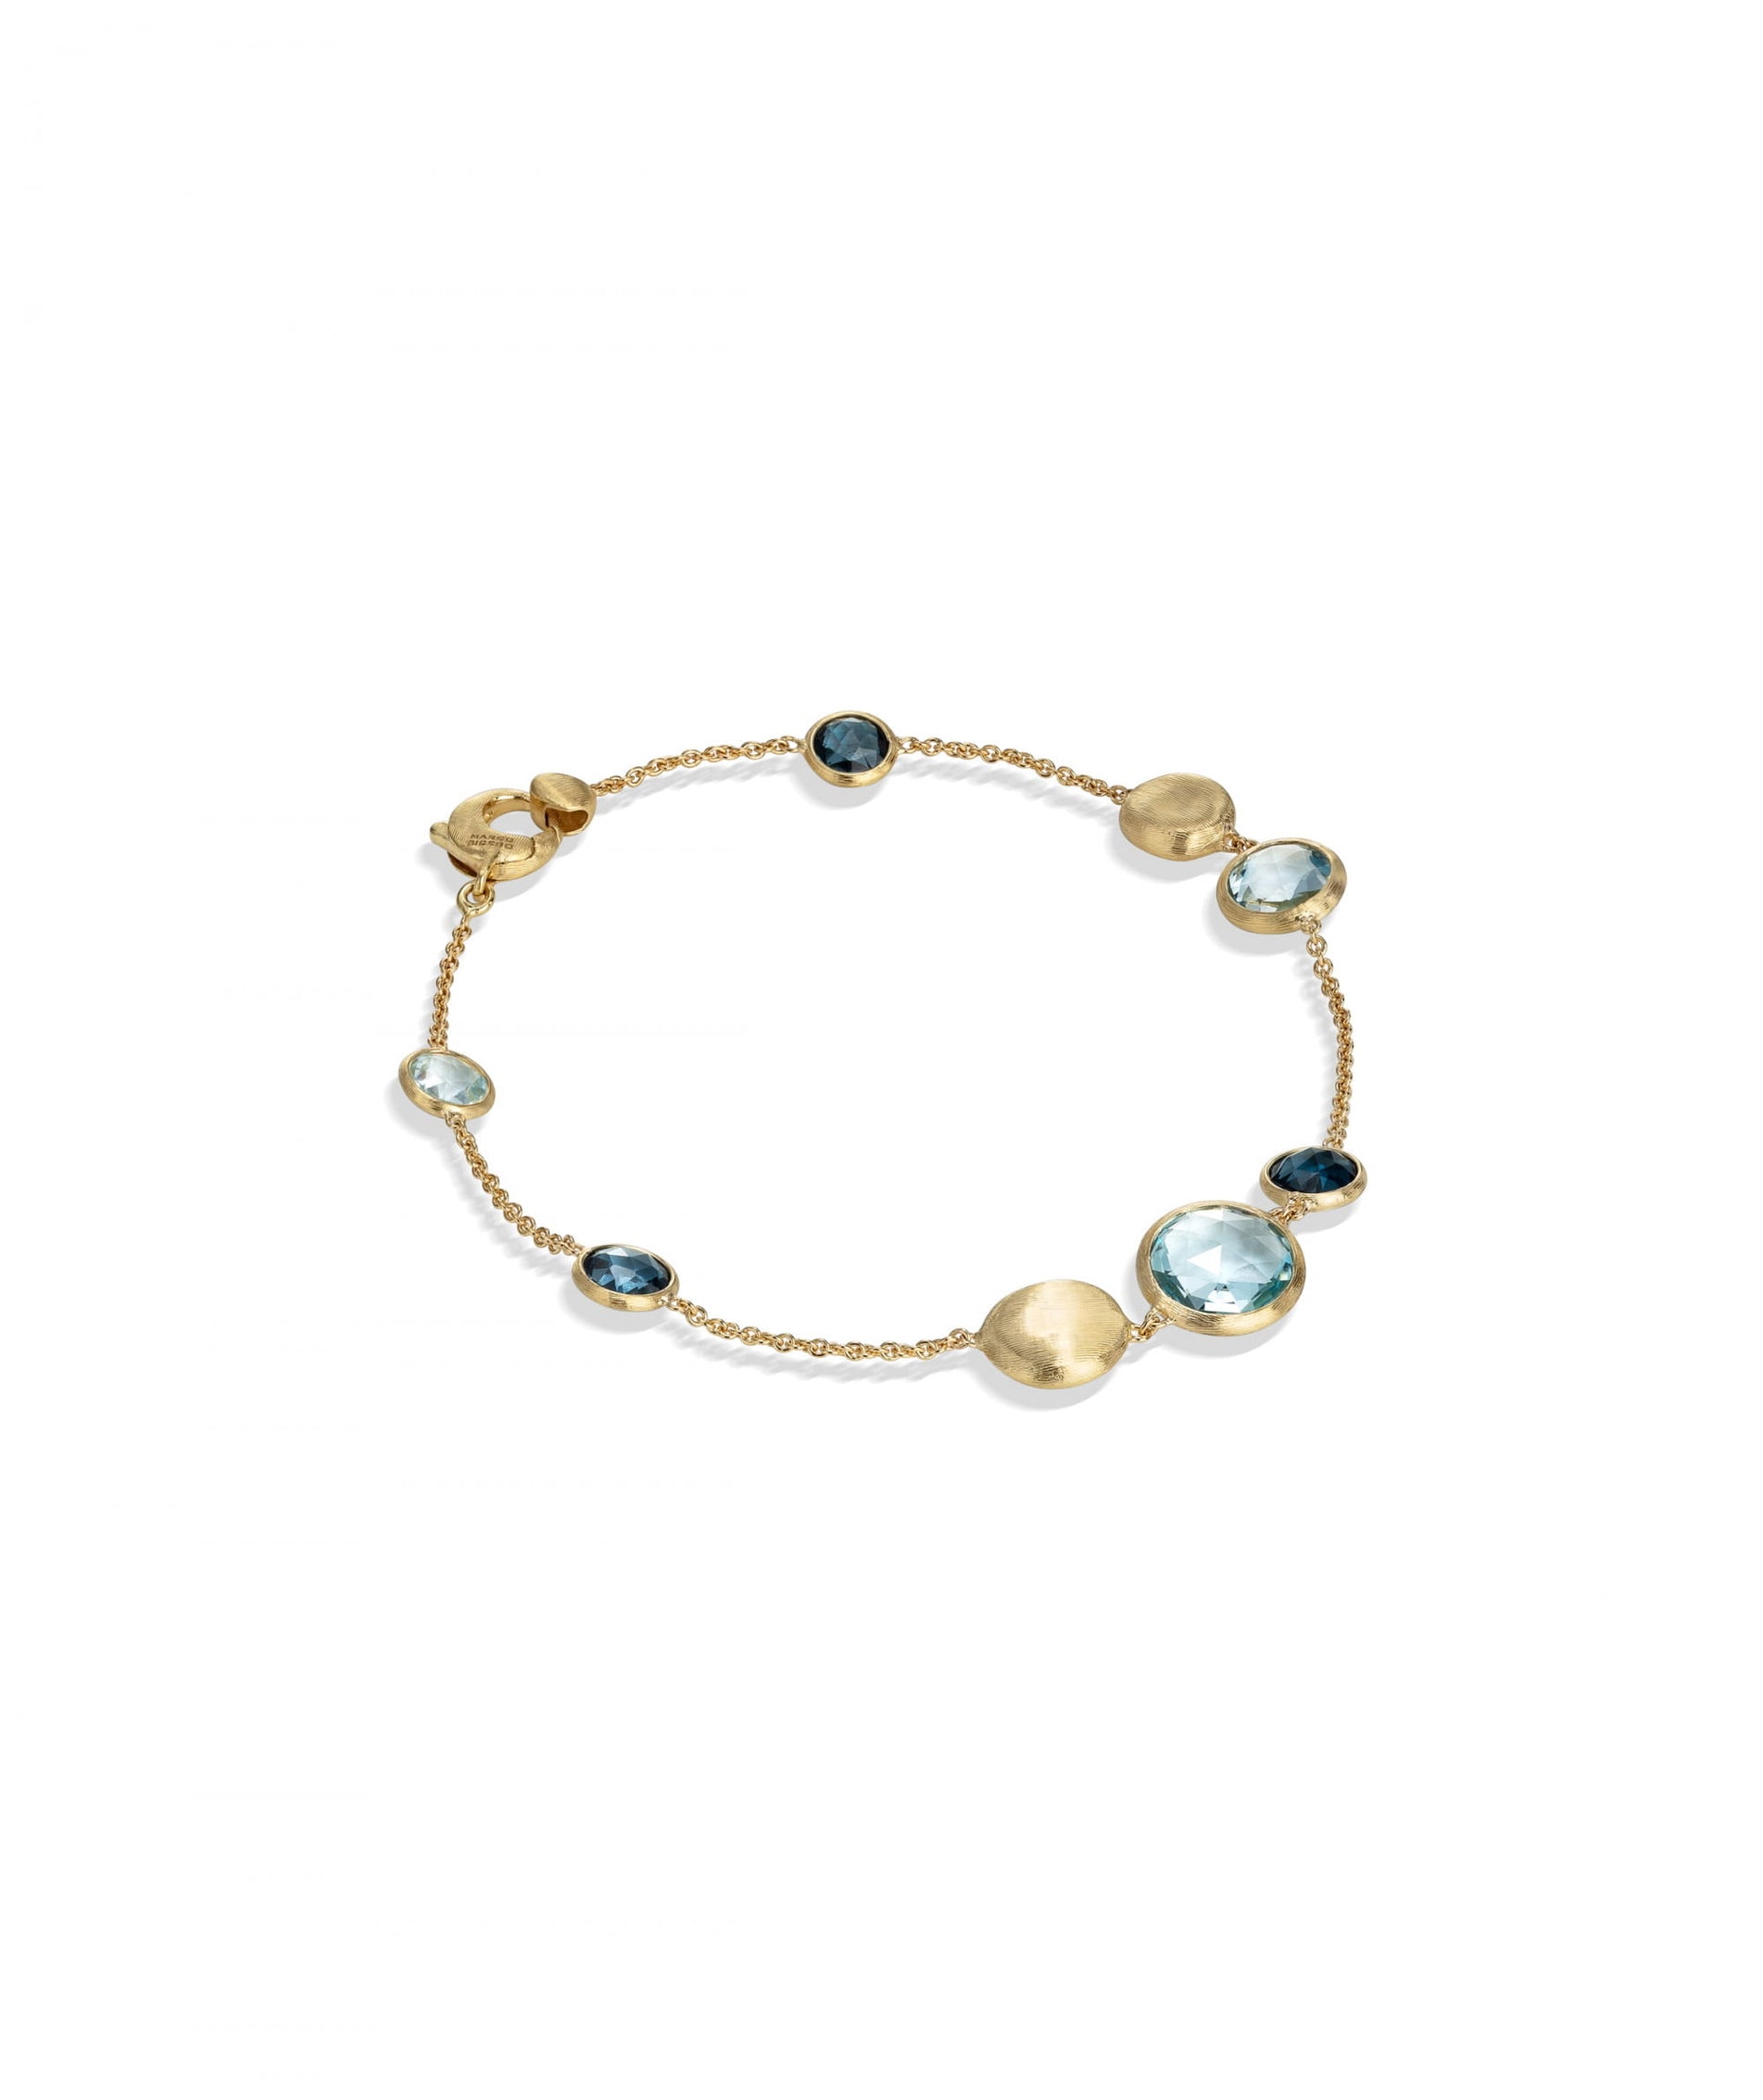 Jaipur Colour Bracelet in 18k Yellow Gold with Gemstones Mixed Blue - Orsini Jewellers NZ